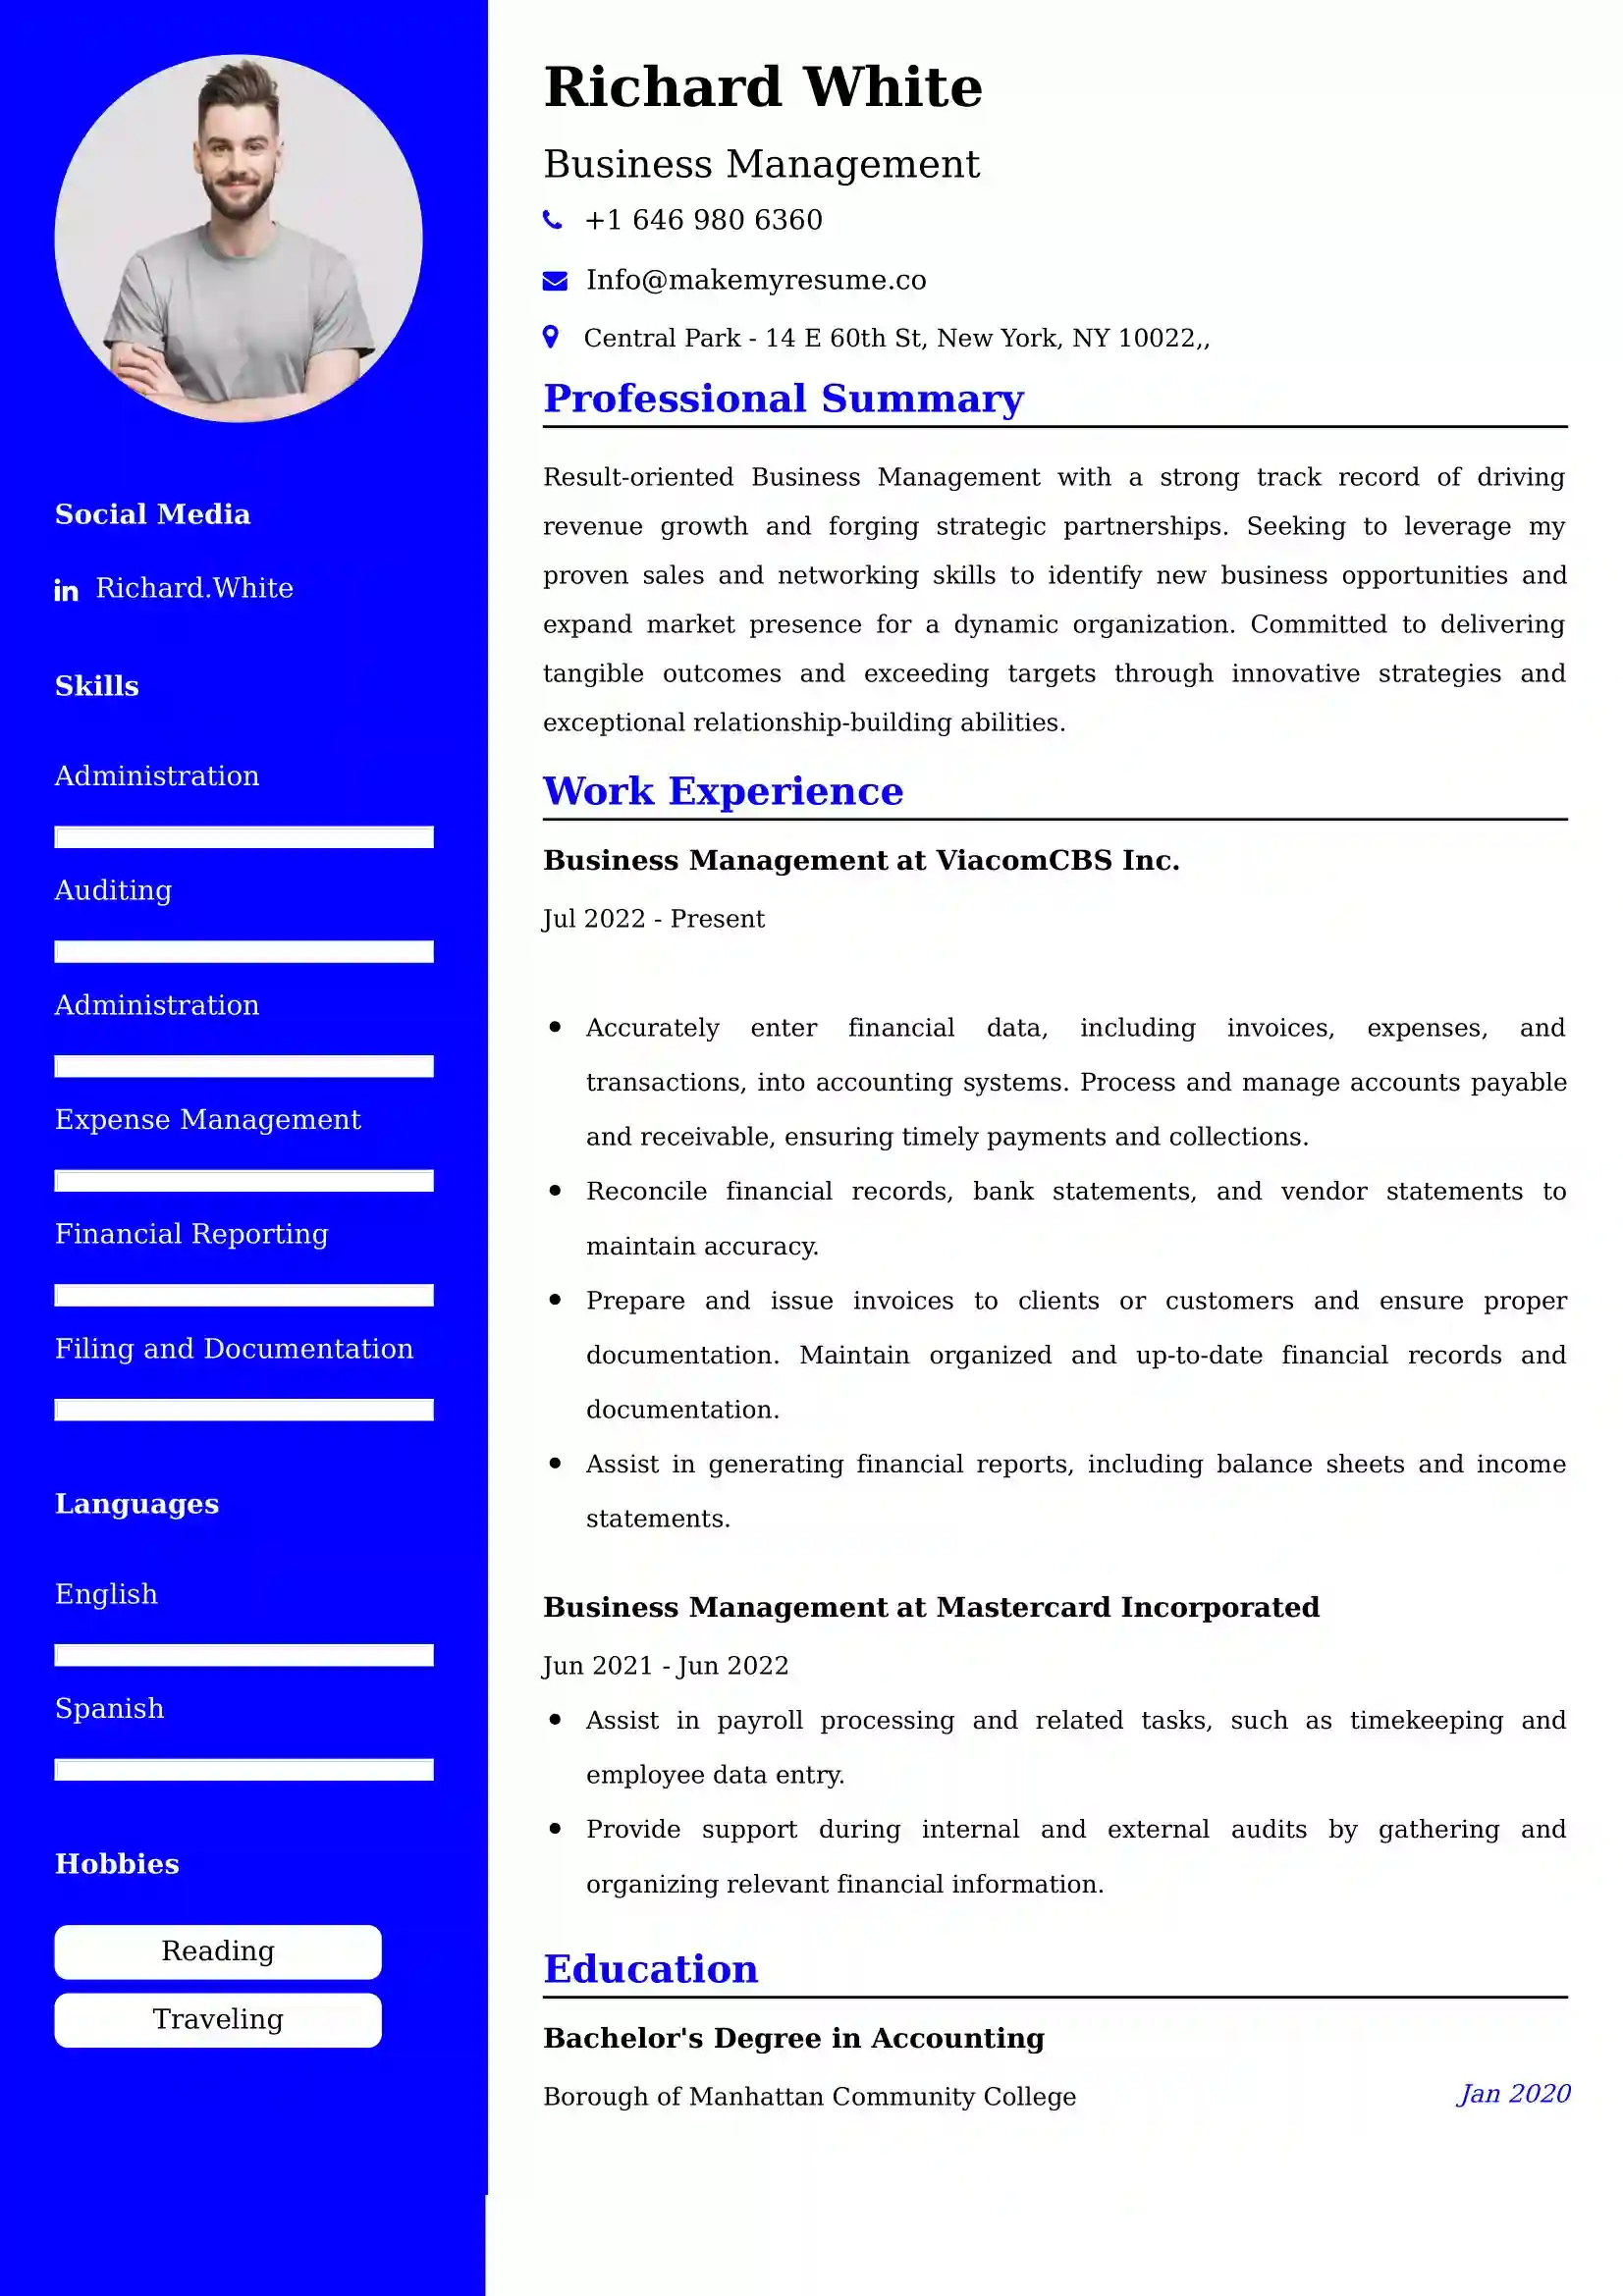 Business Management Resume Examples - UK Format, Latest Template.